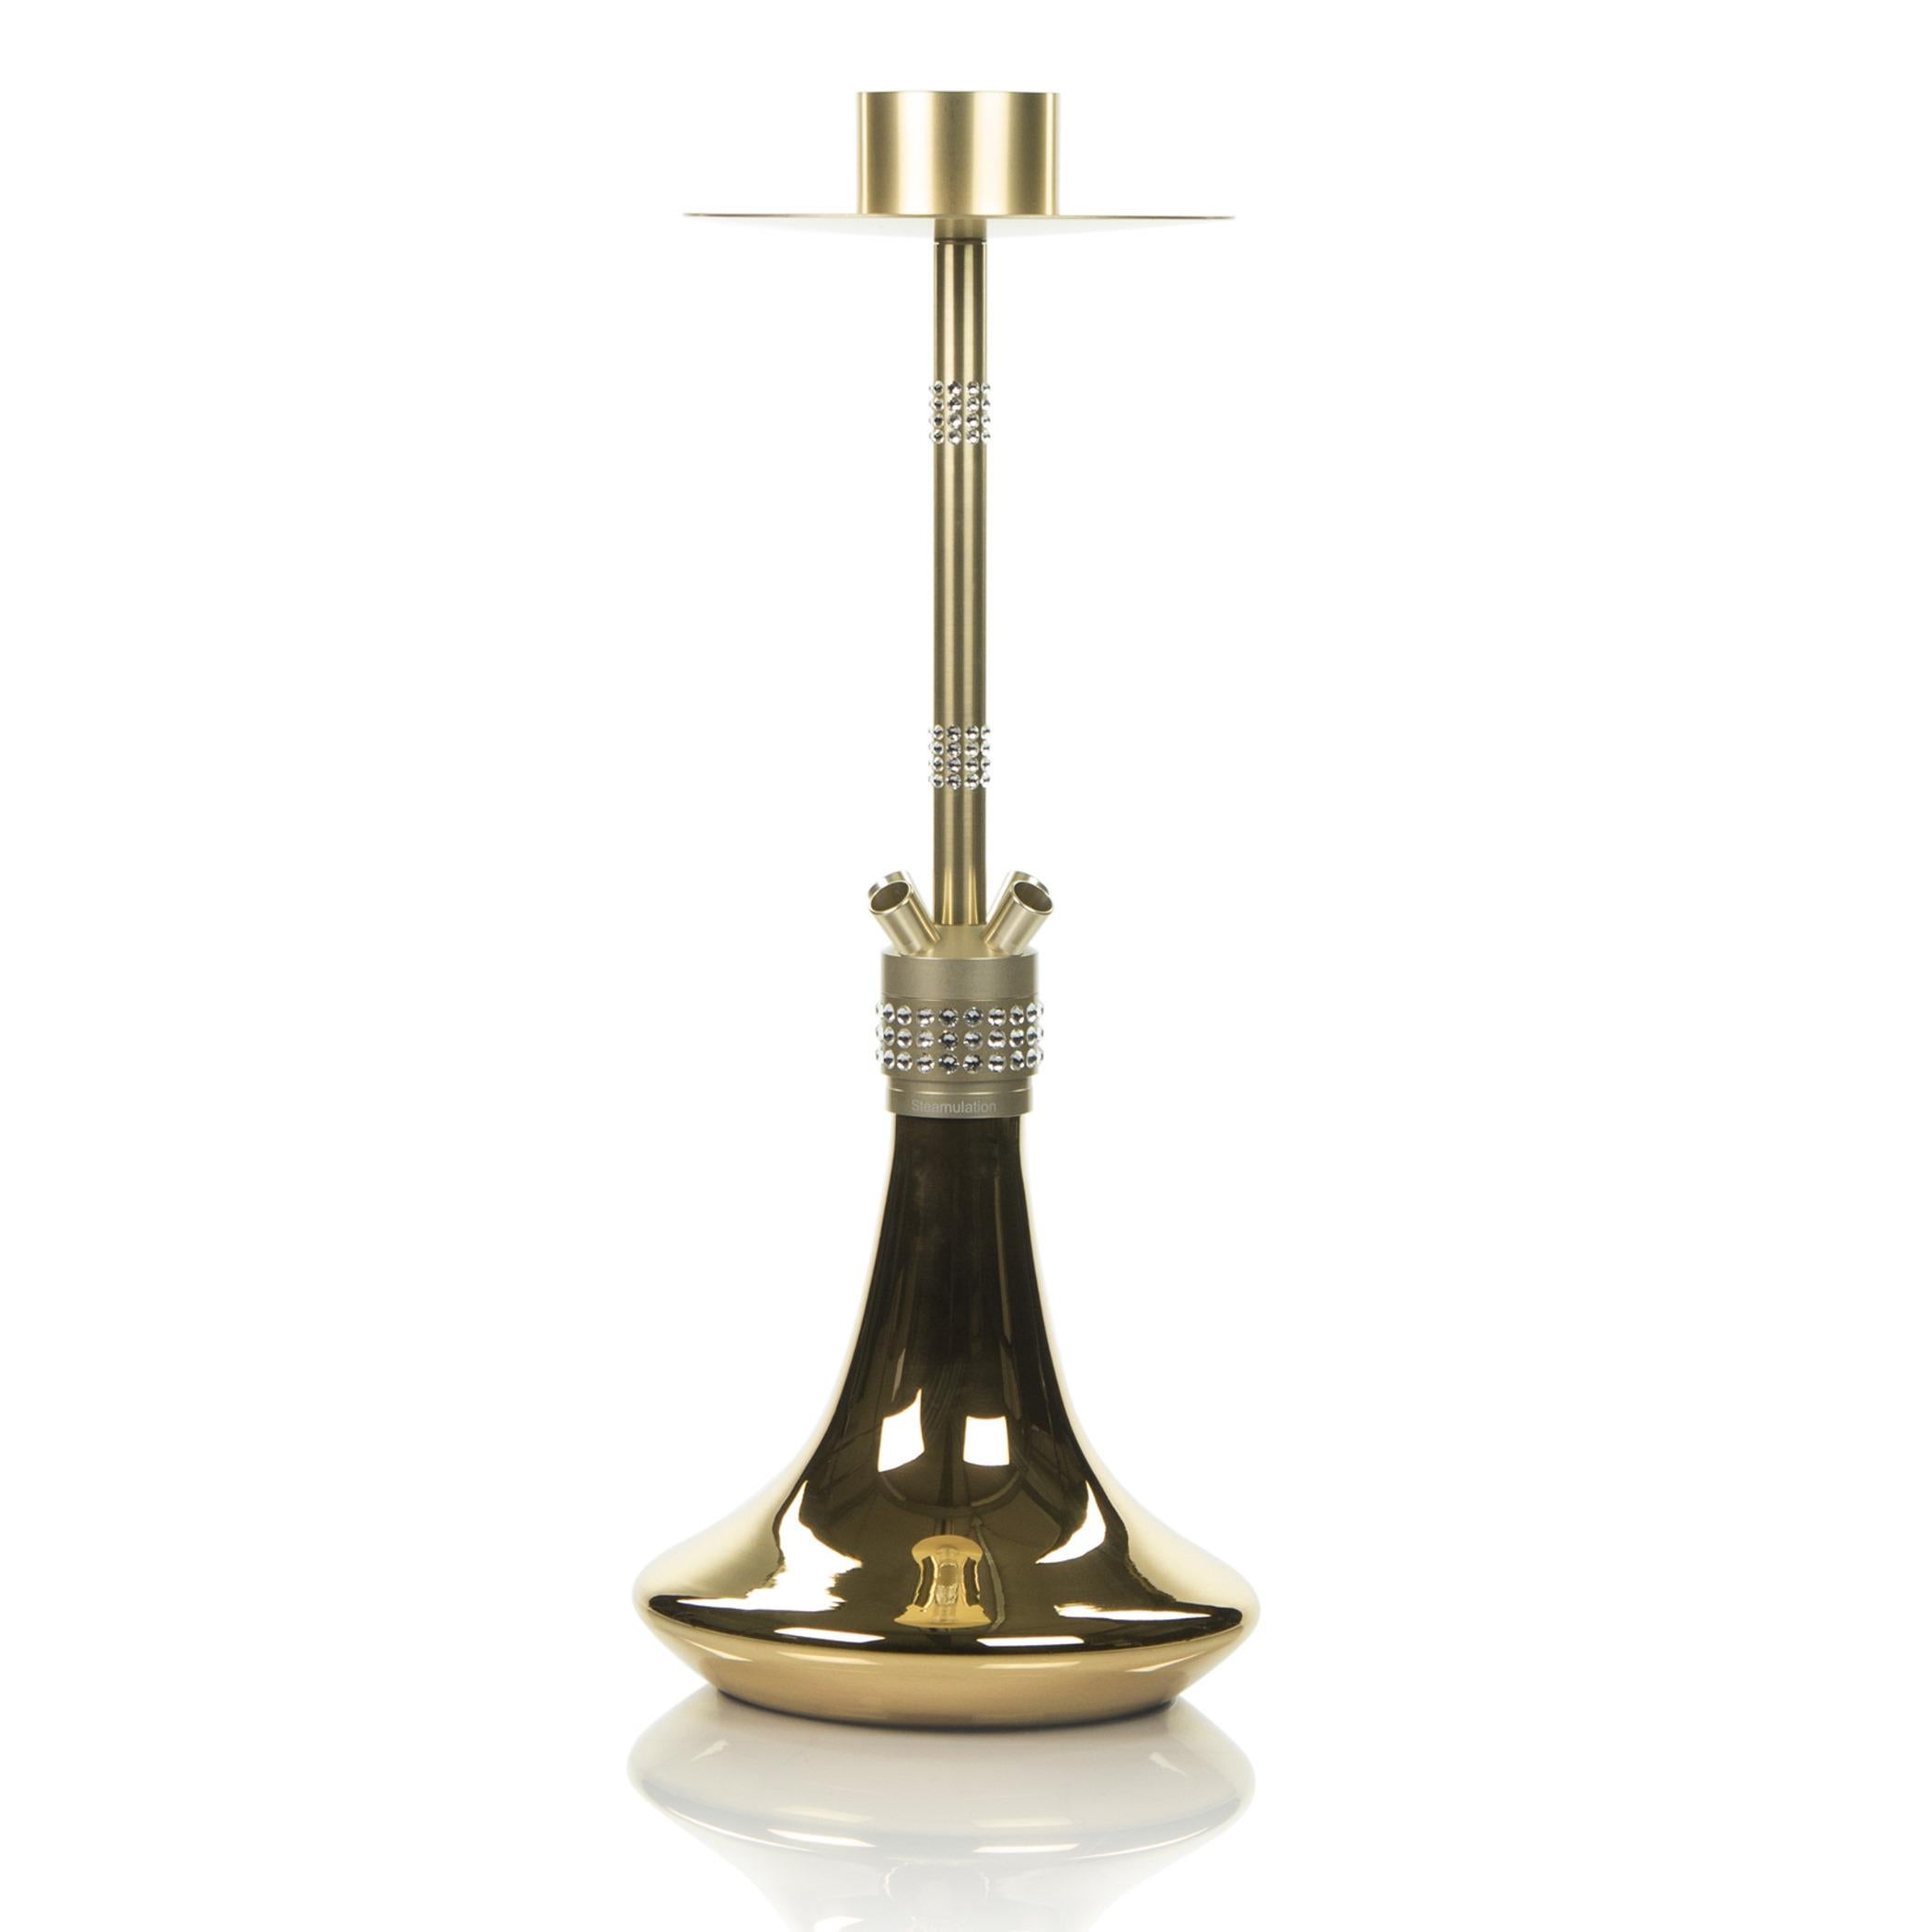 This Shisha is a truly a piece of technological and esthetic perfection. It is made of finest materials such as blown glass coated with pure Gold, Jet-aluminum anodized in Gold, 228 Swarovski Crystals, Crystal Glass-Smoke-Column
Jet-aluminum